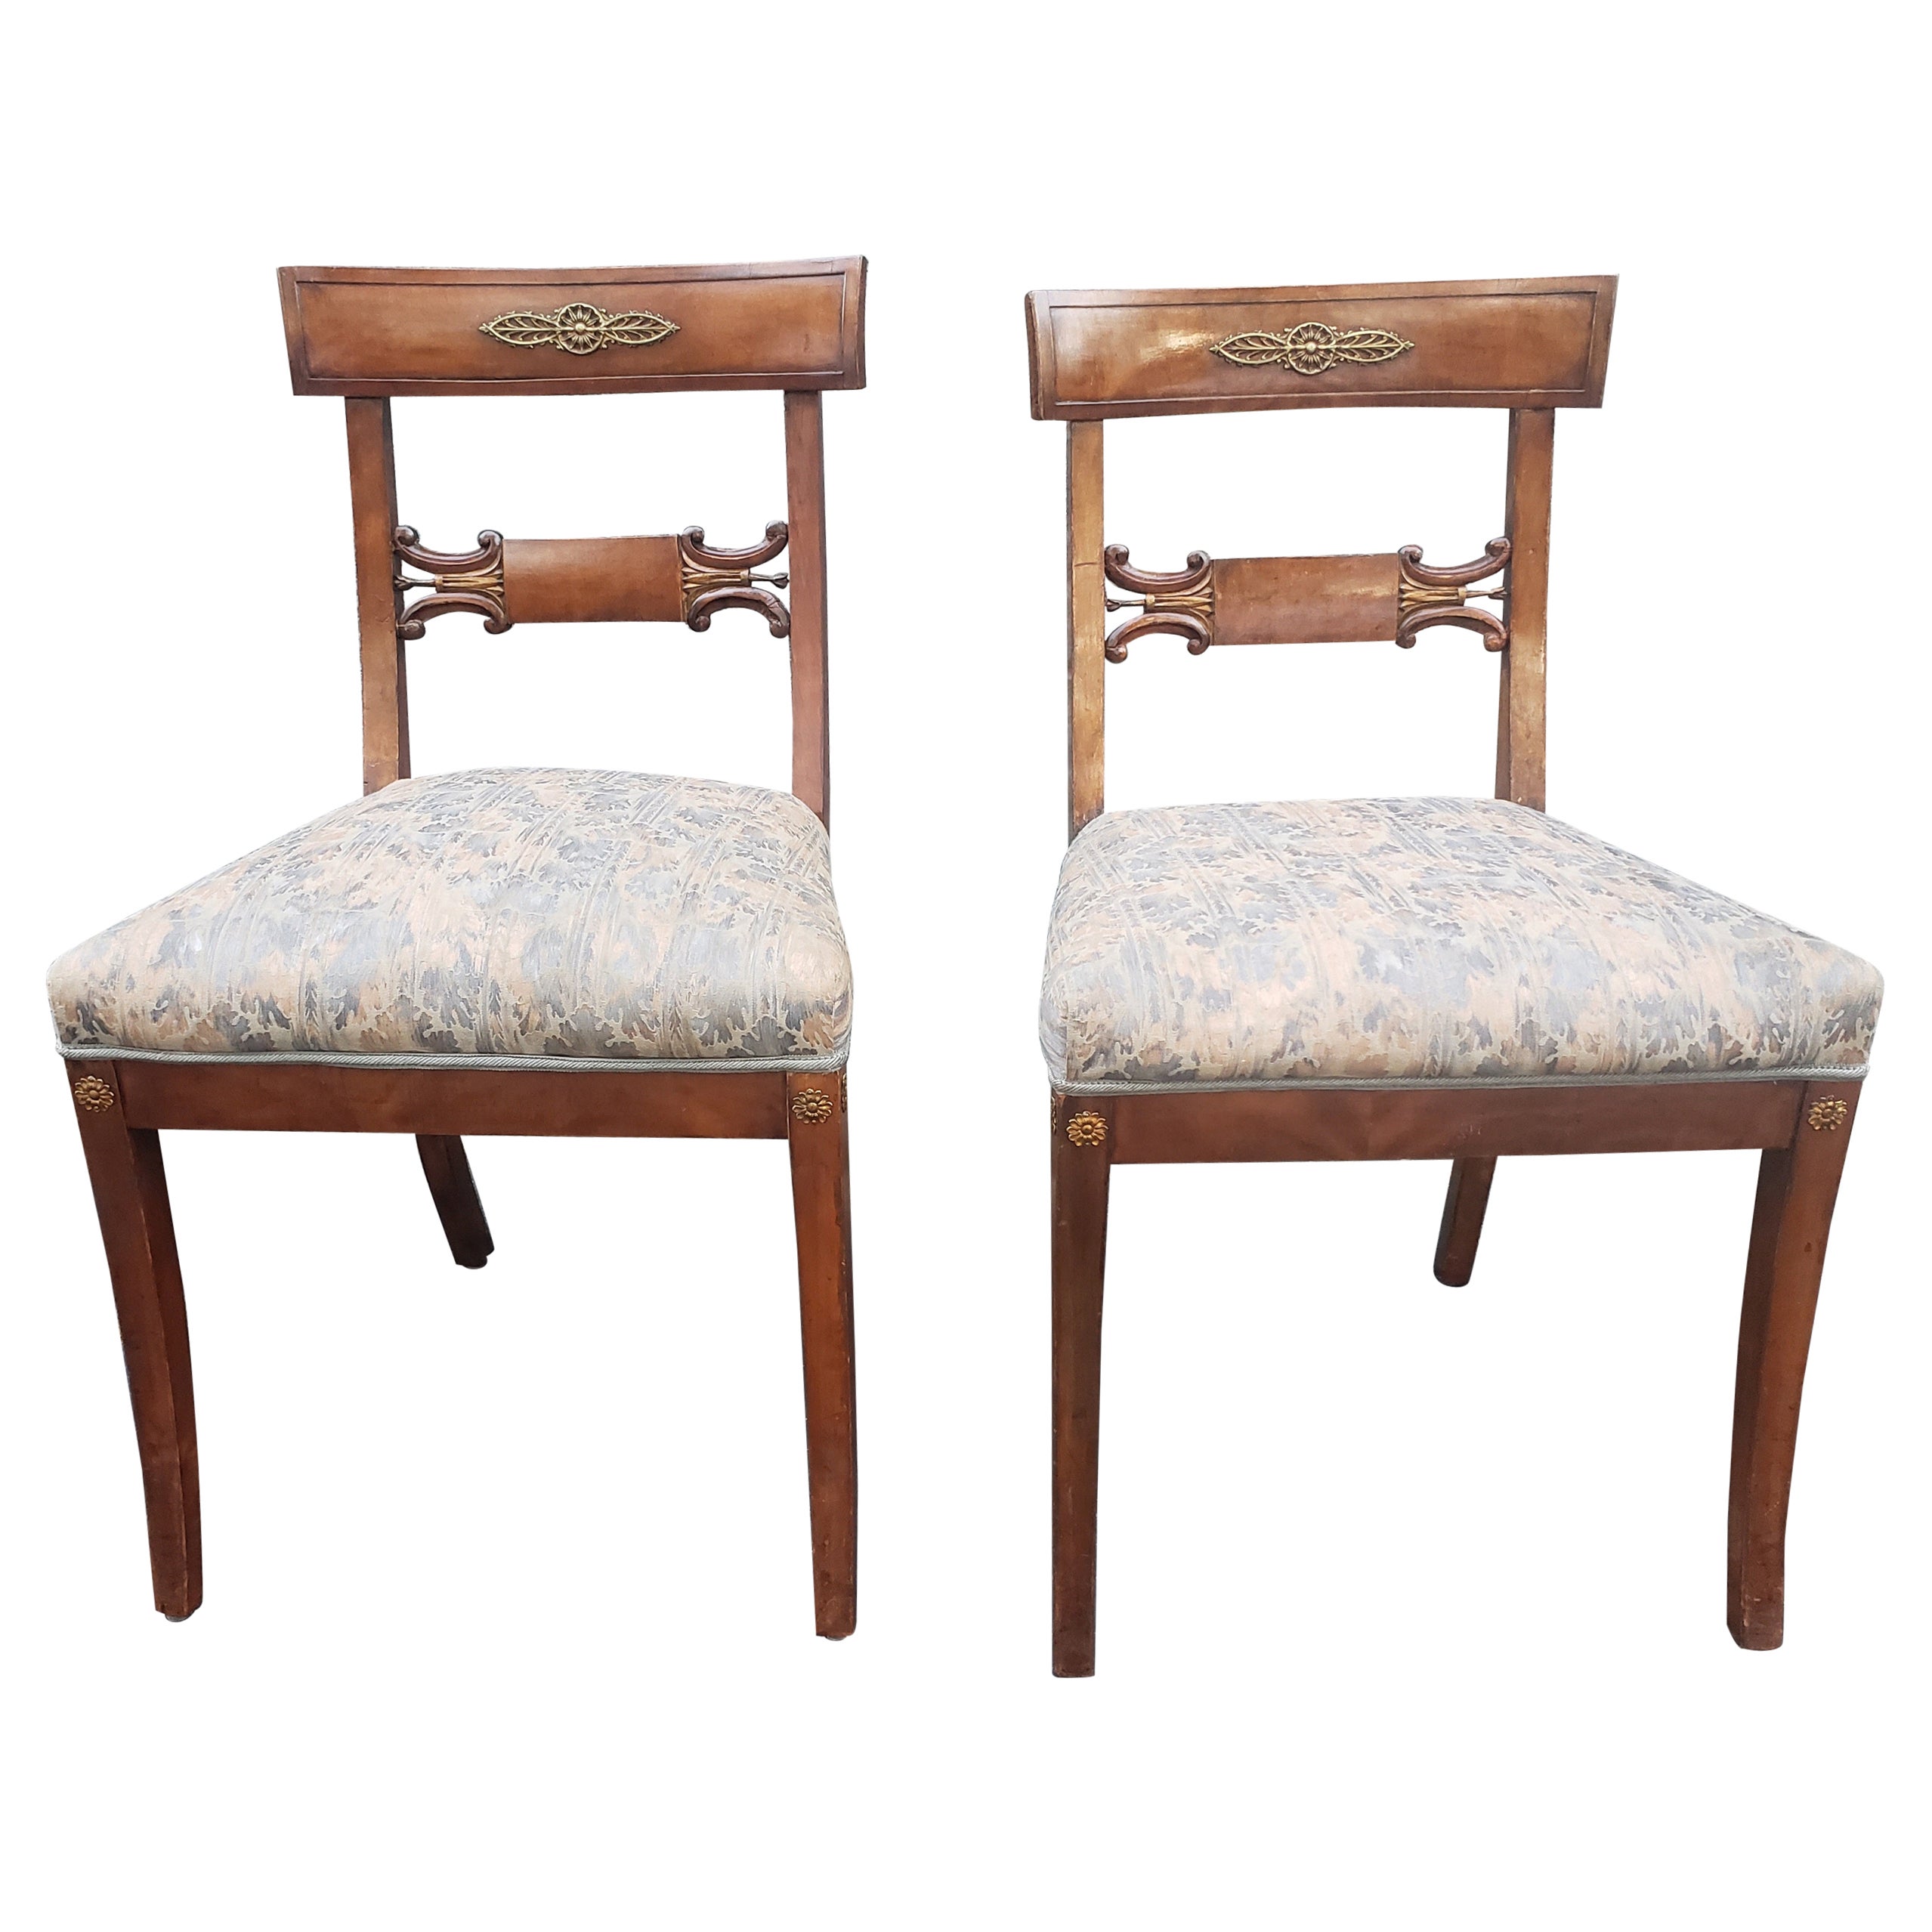 Pair of 19th C Empire Ormolu Mounted, Partial Gilt Mahogany & Upholstered Chairs For Sale